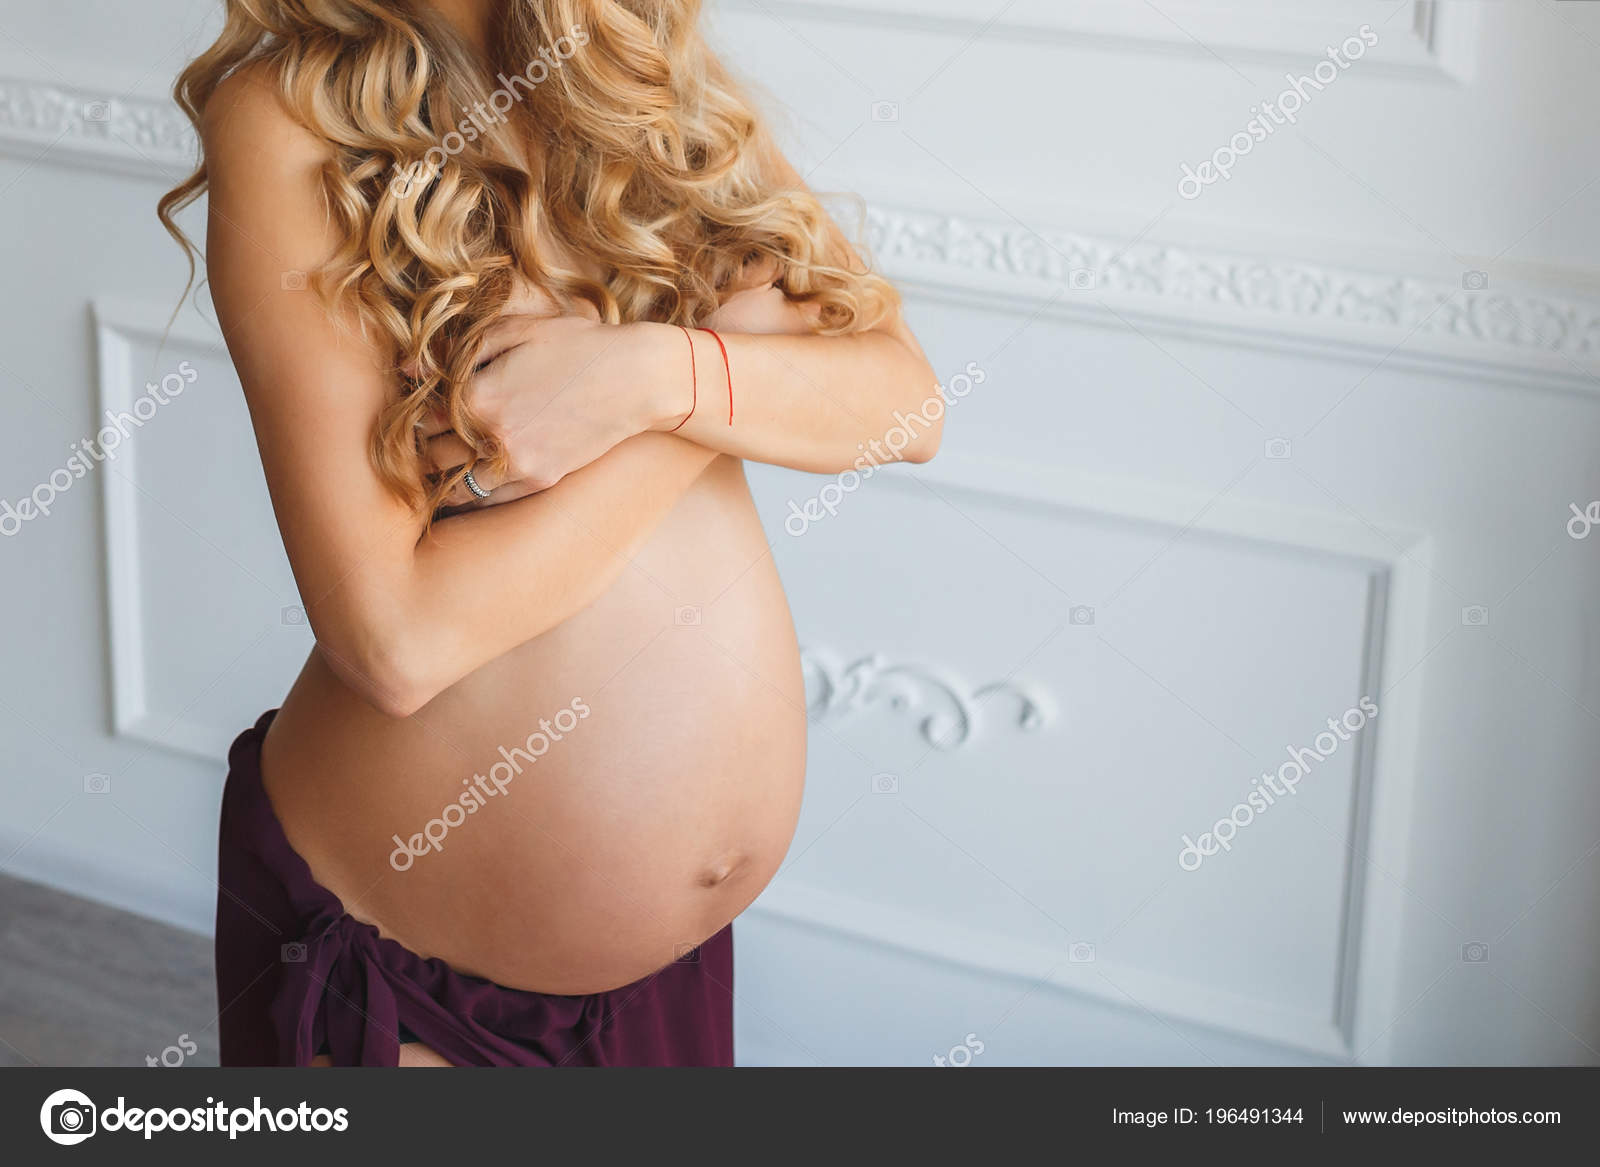 Long Hair Pregnant Nude - Pregnant with beautiful naked belly stands against white ...